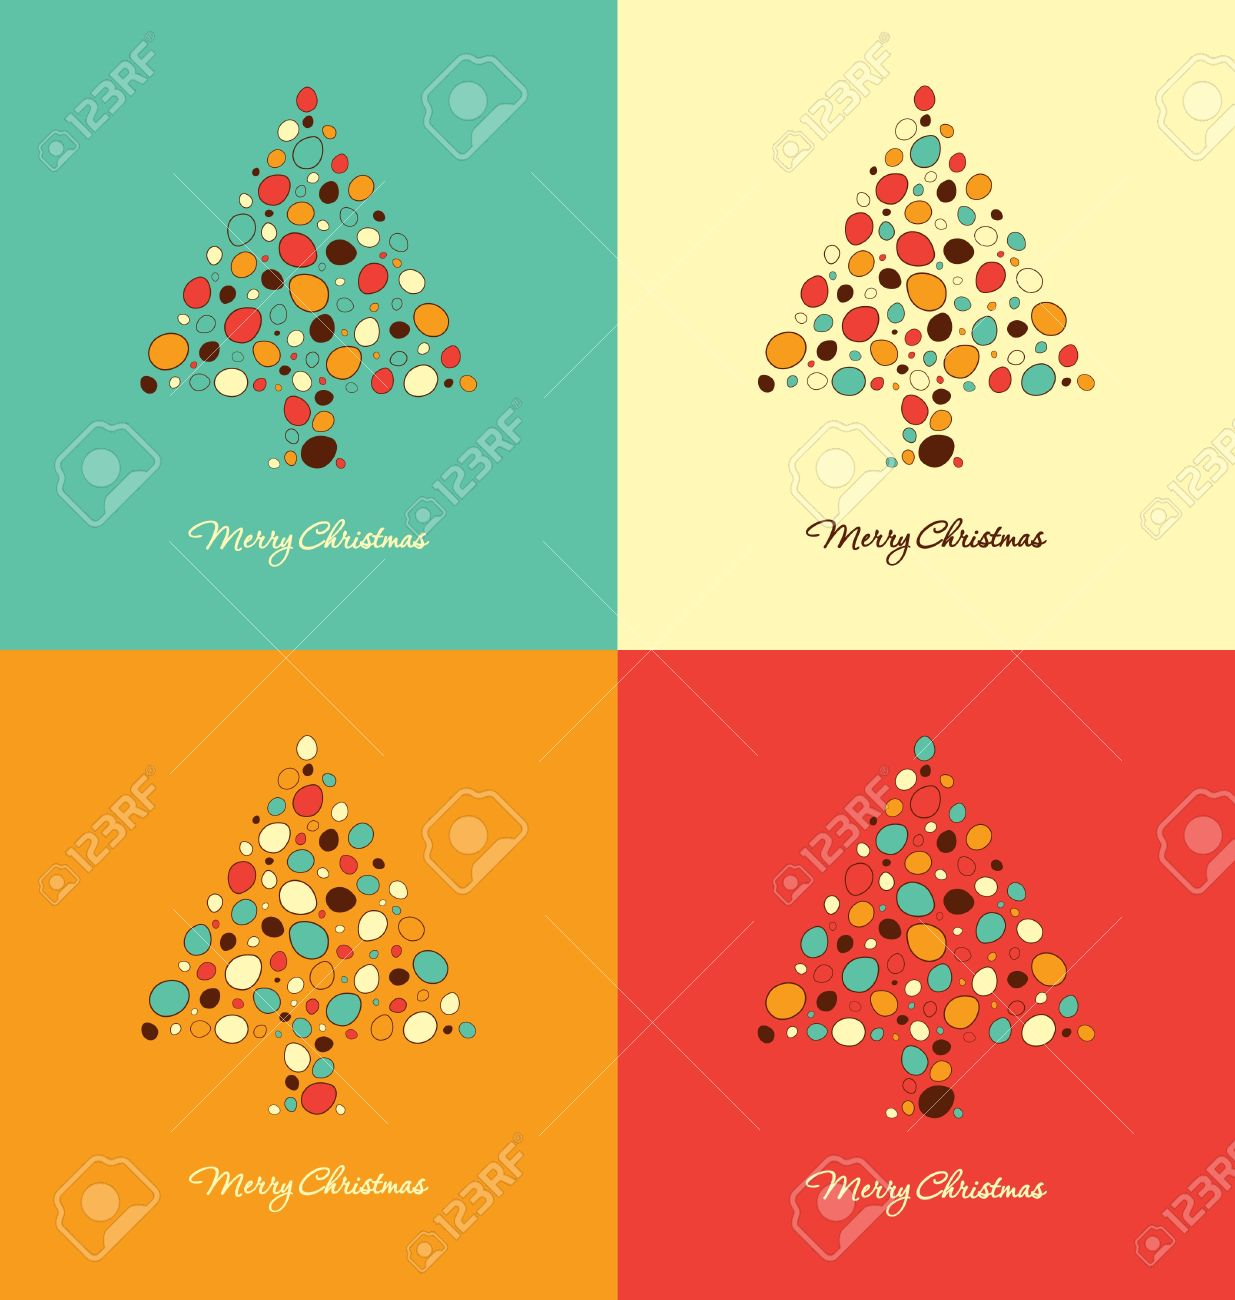 Christmas Letter Background Template - Free Christmas Card Designs Acurnamedia